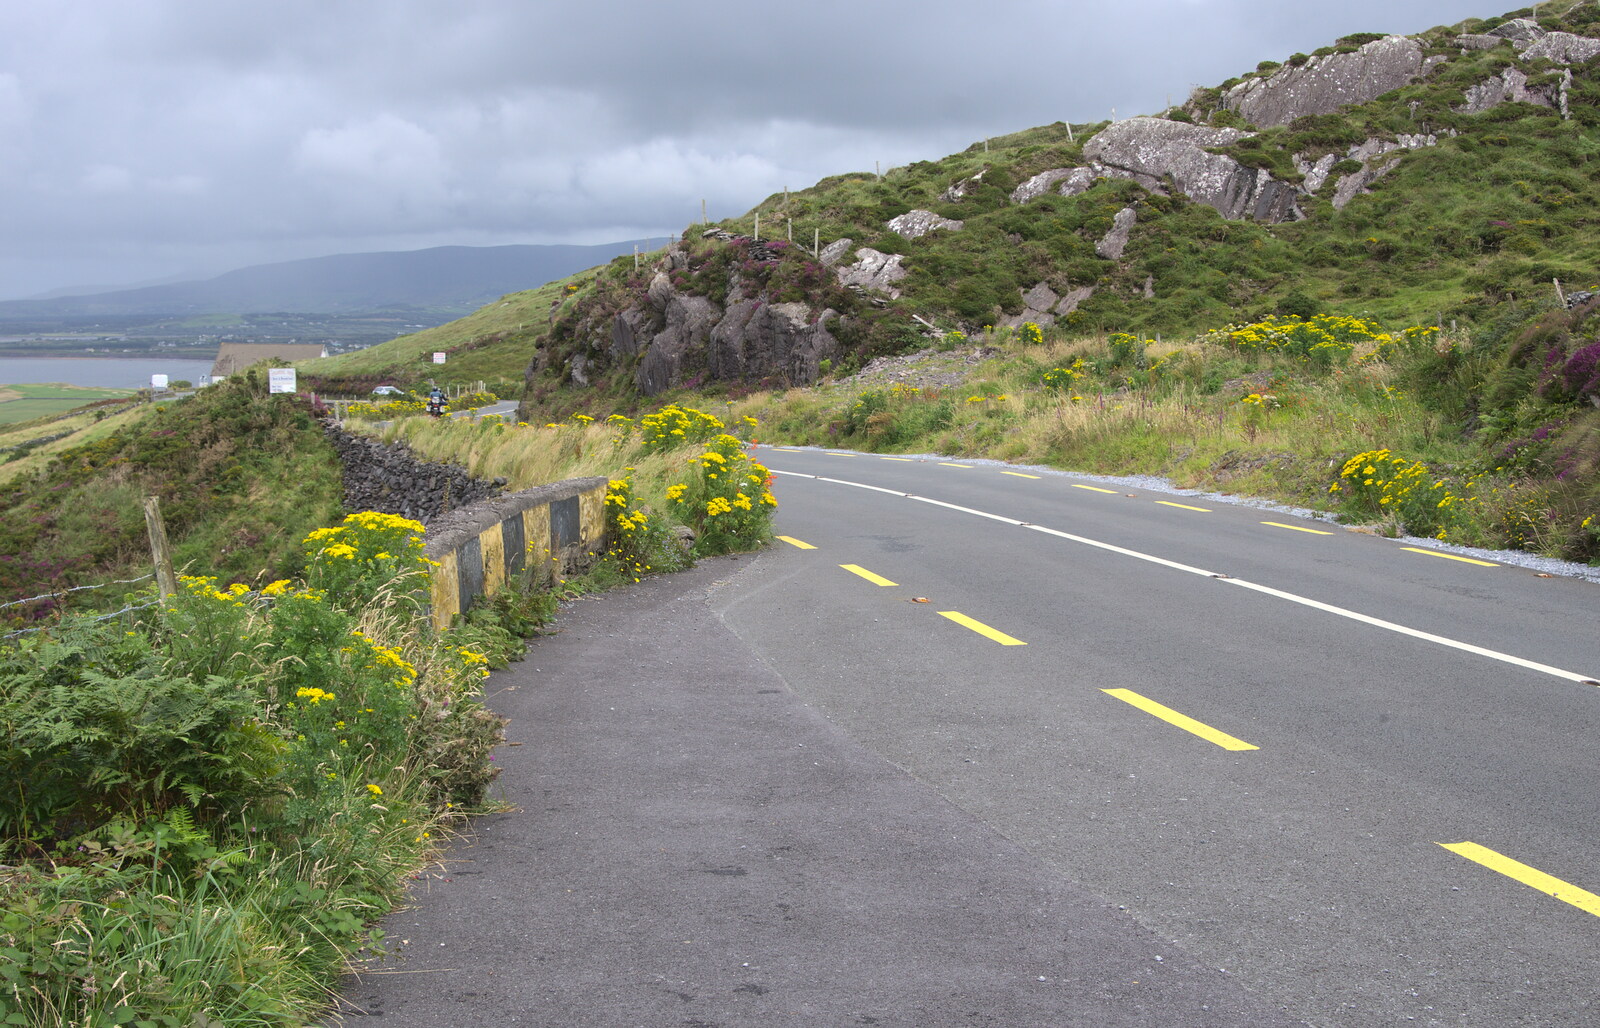 The coast road from Baile an Sceilg to An tSnaidhme, Co. Kerry, Ireland - 31st July 2017